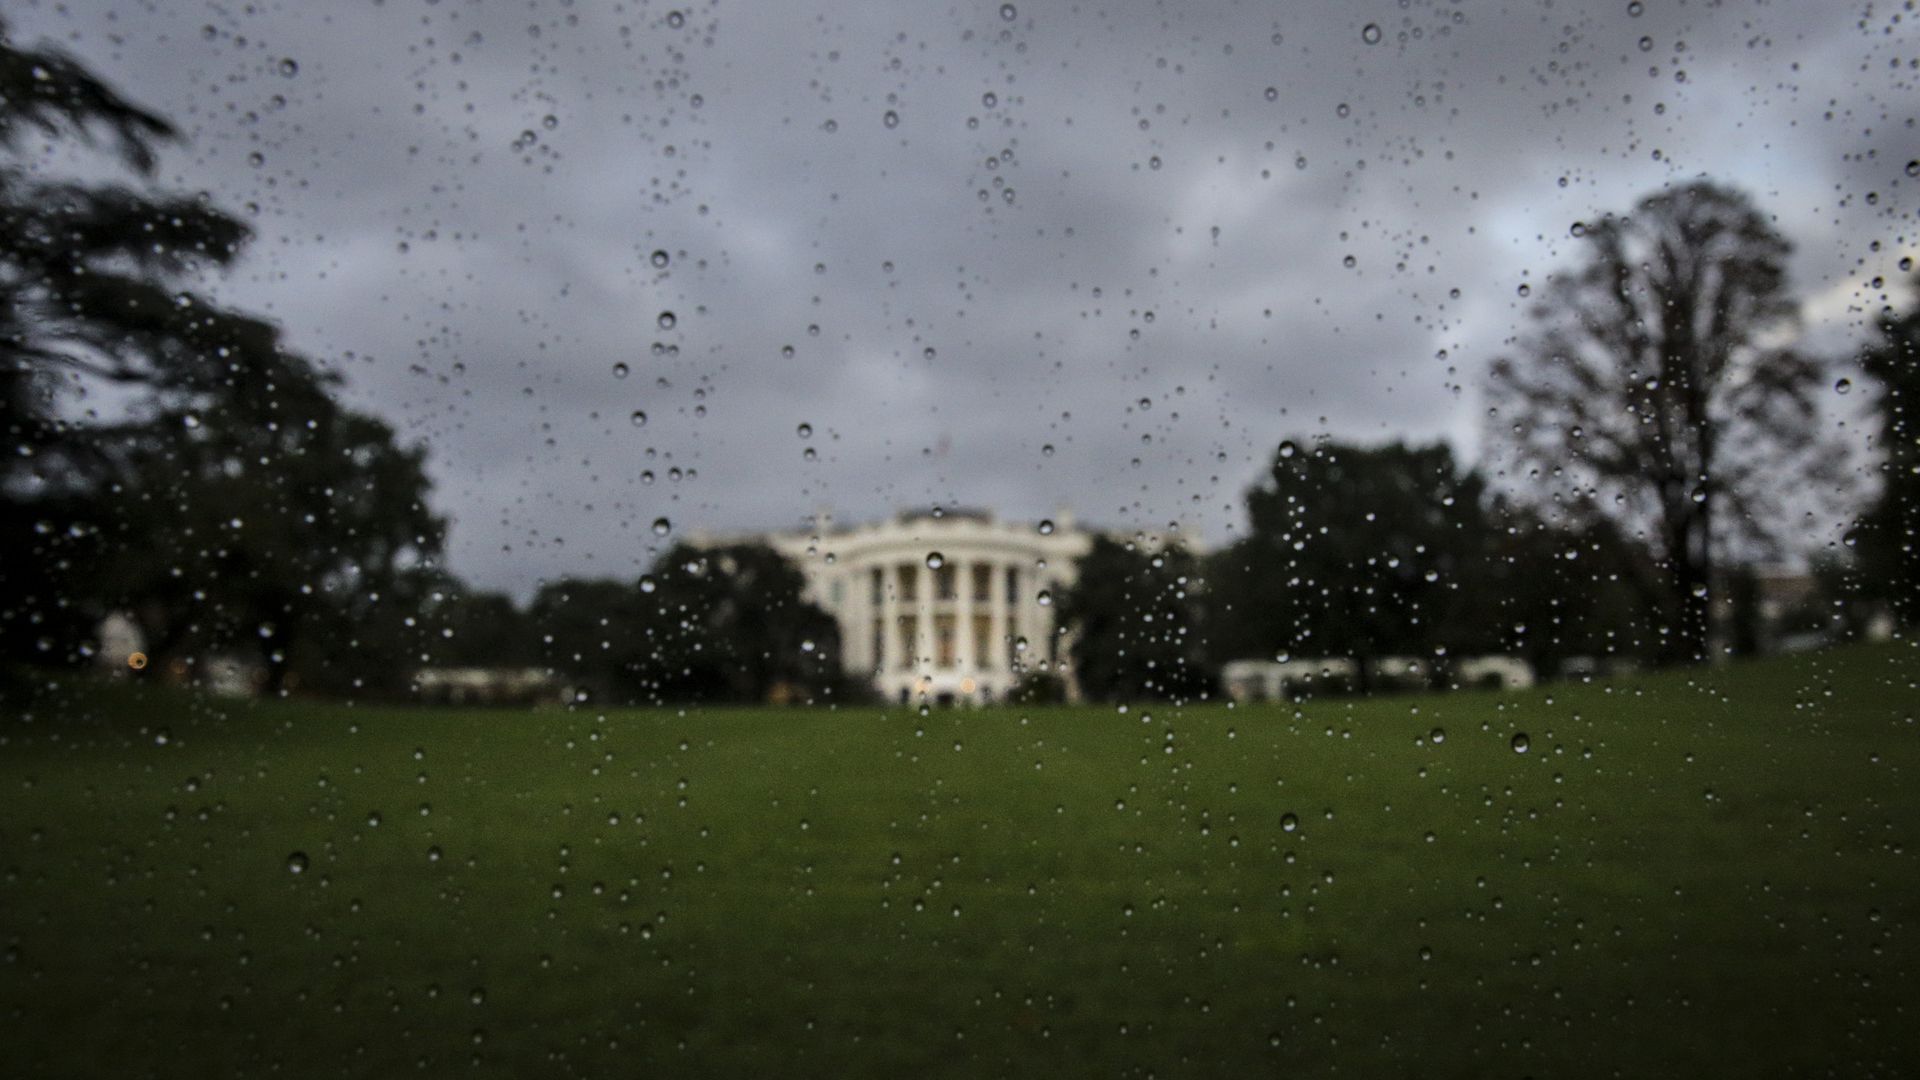 The South Lawn of the White House shown on a rainy day